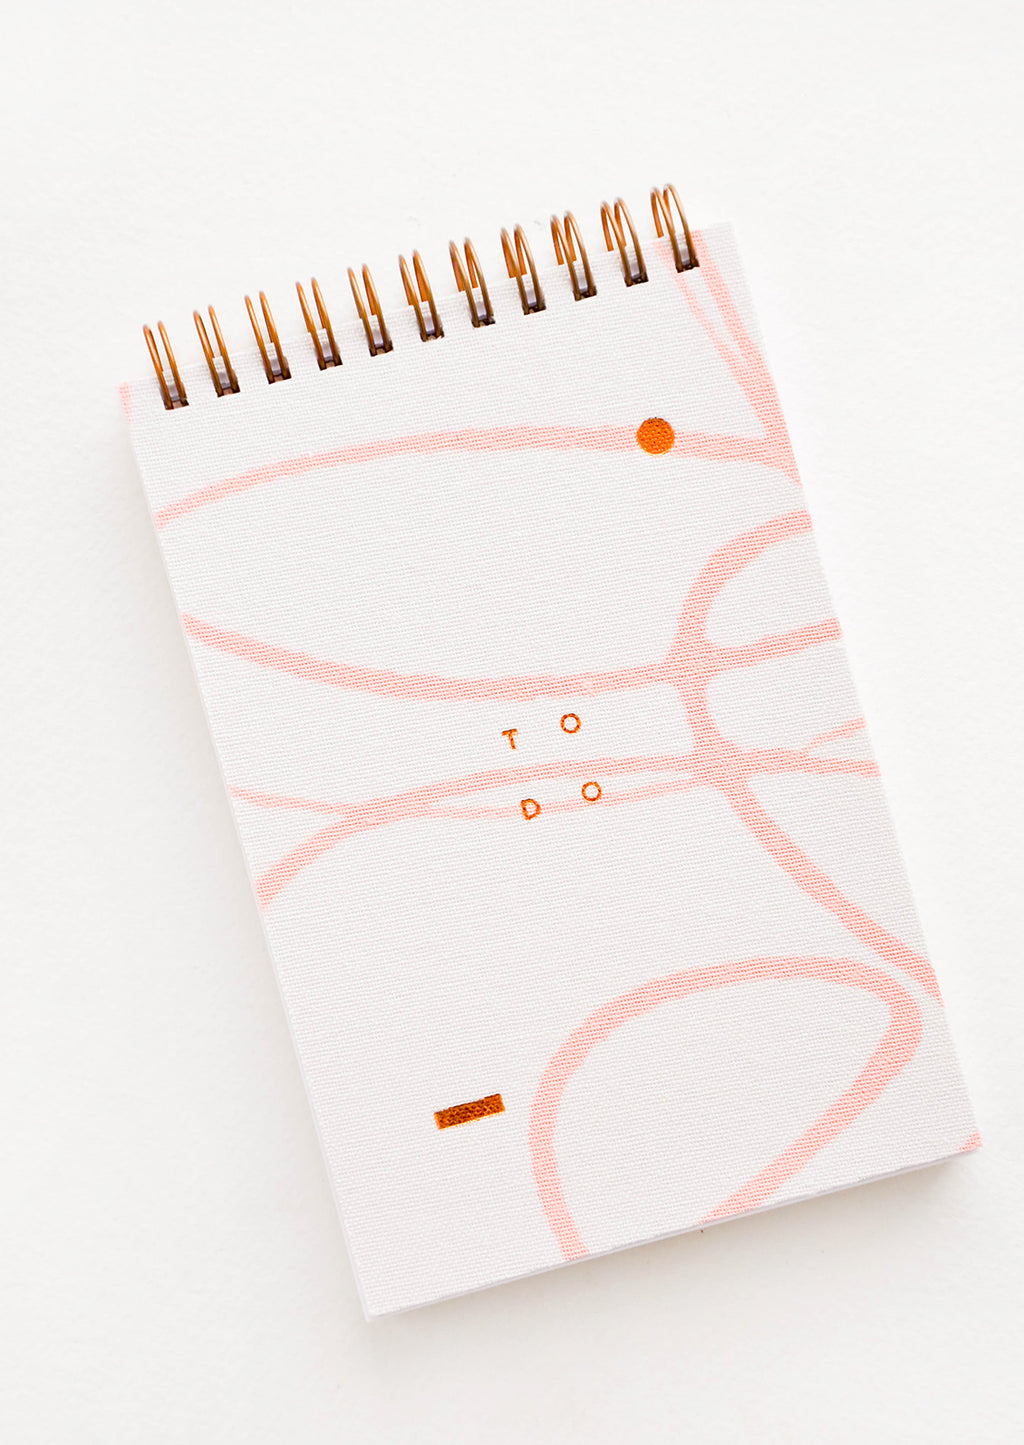 1: Spiral bound notepad with abstract line decoration and the text "TO DO".